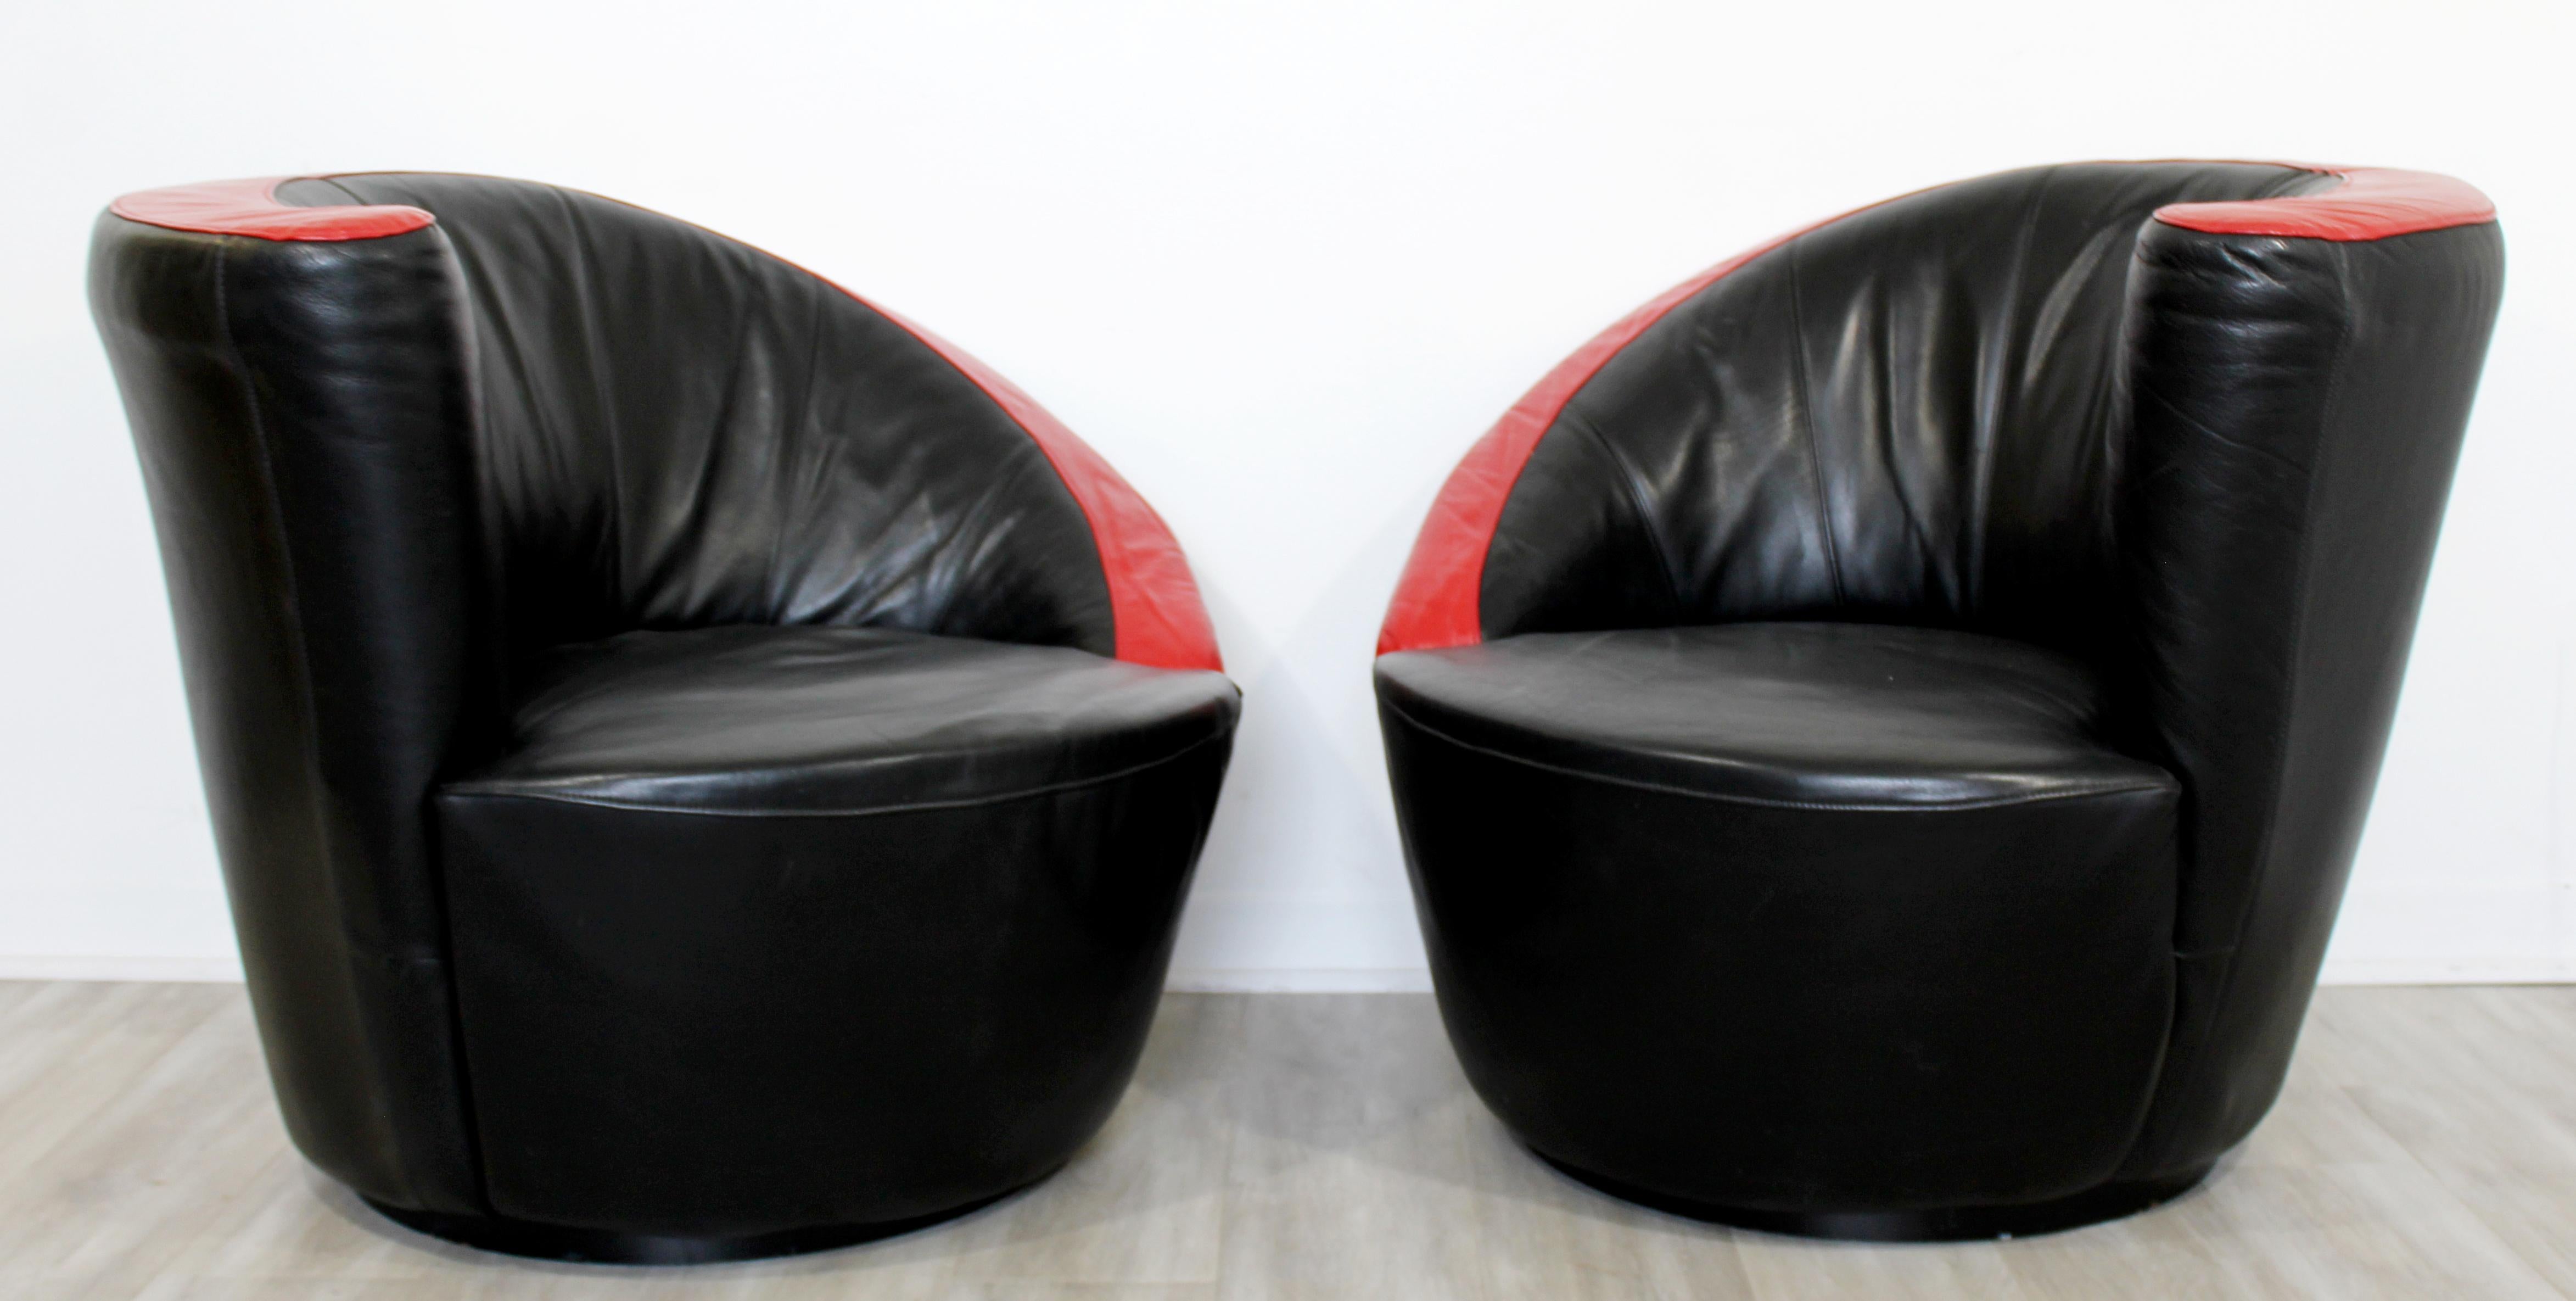 For your consideration is a fabulous pair of curved, swivel, lounge chairs. In very good vintage condition. The dimensions of each are 34